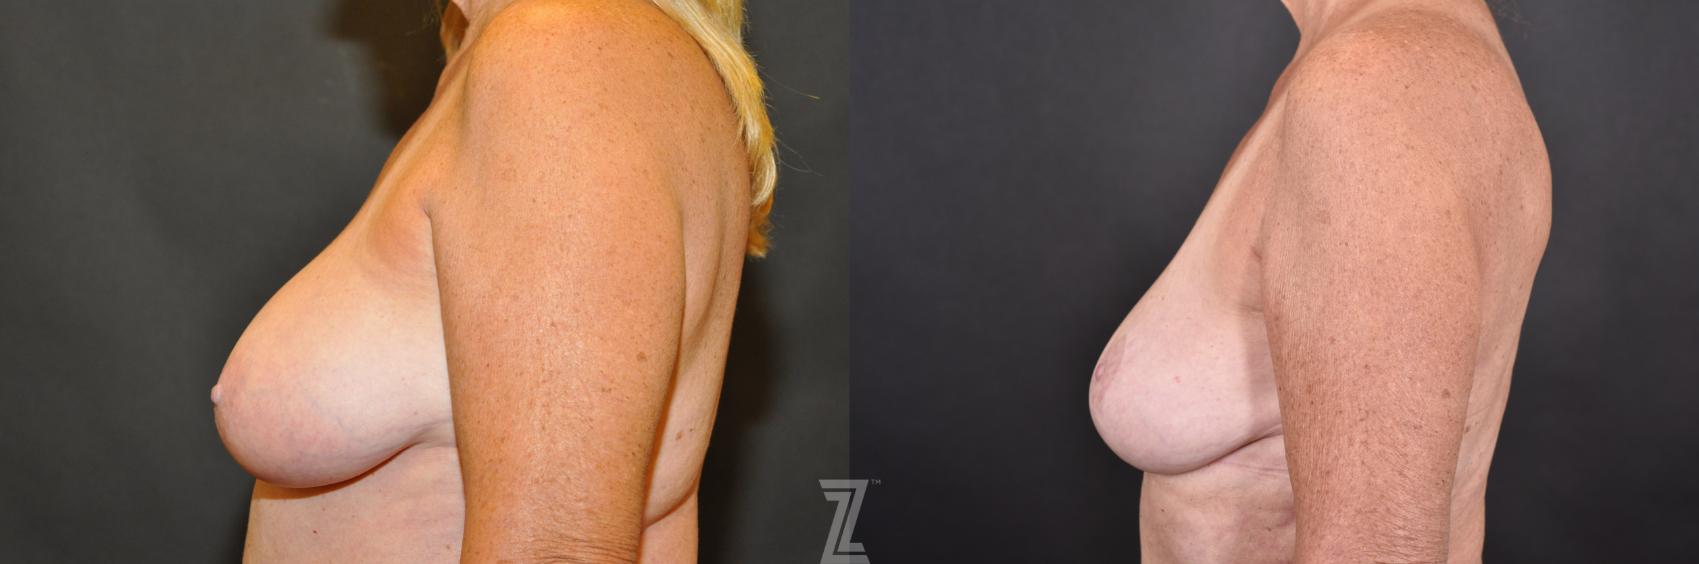 Breast Reduction Before & After Photo | Austin, TX | The Piazza Center for Plastic Surgery & Advanced Skin Care